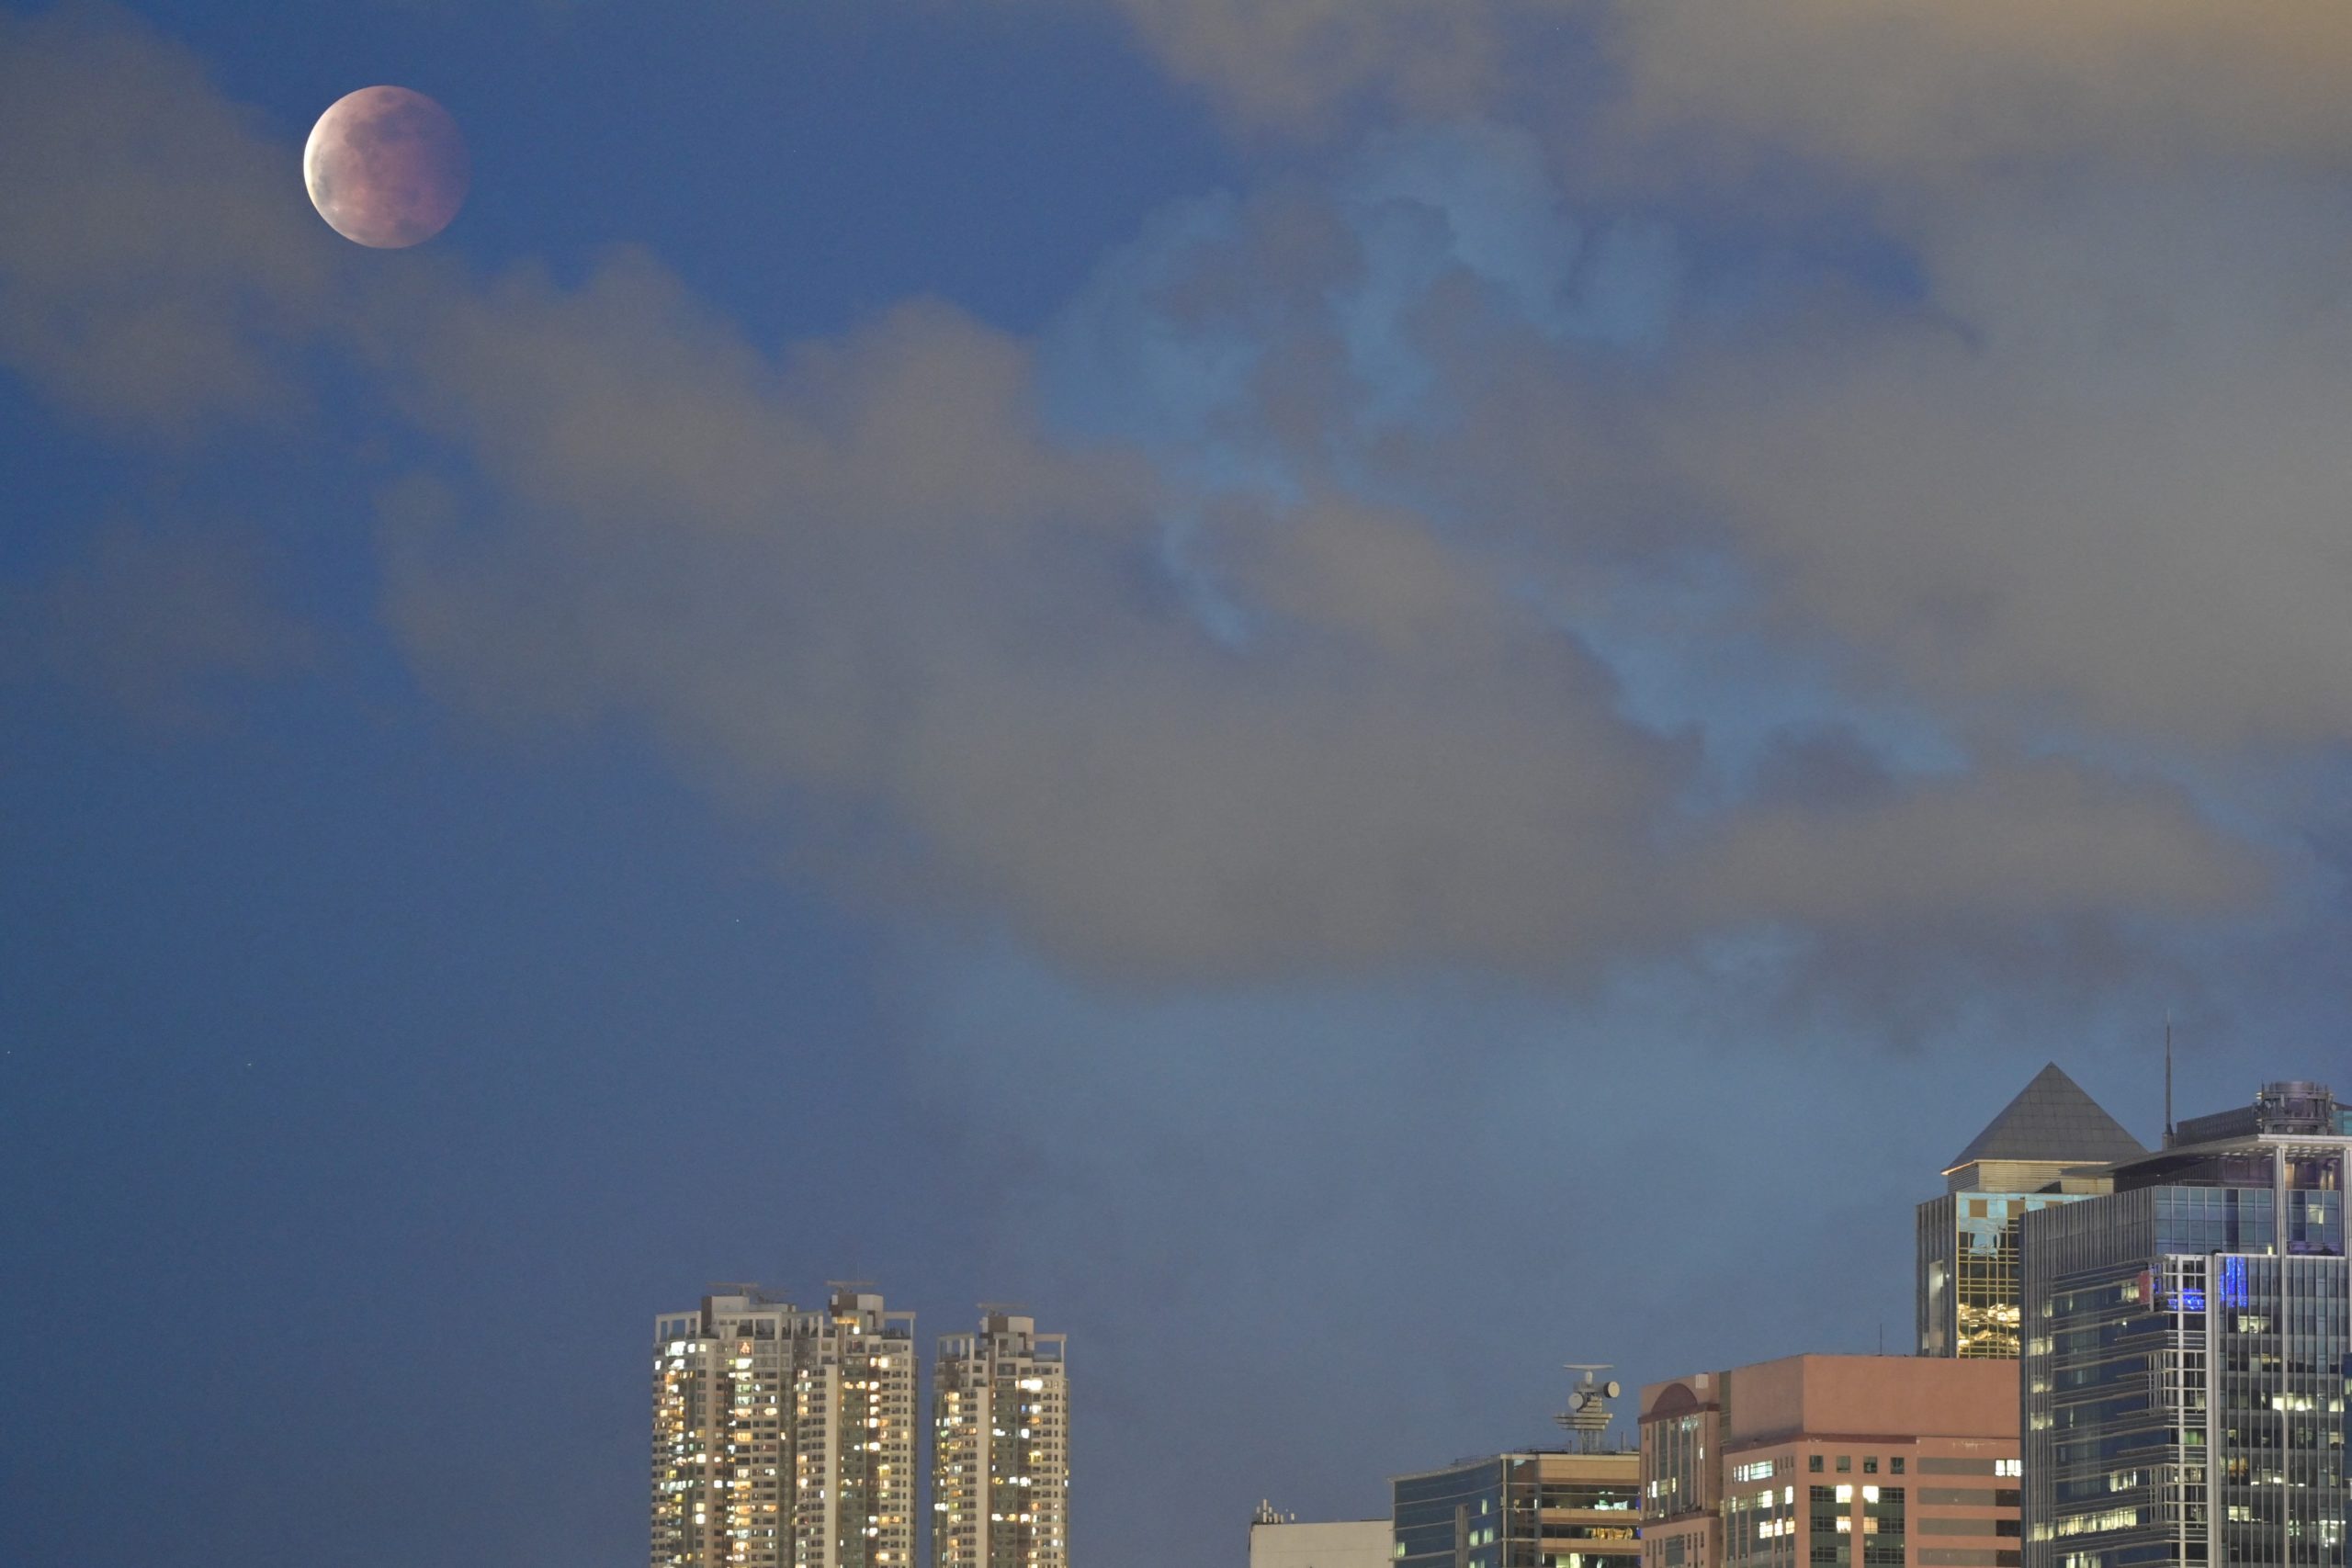 13 Spectacular Pics of the ‘Super Blood Moon’ Eclipse From Around the World